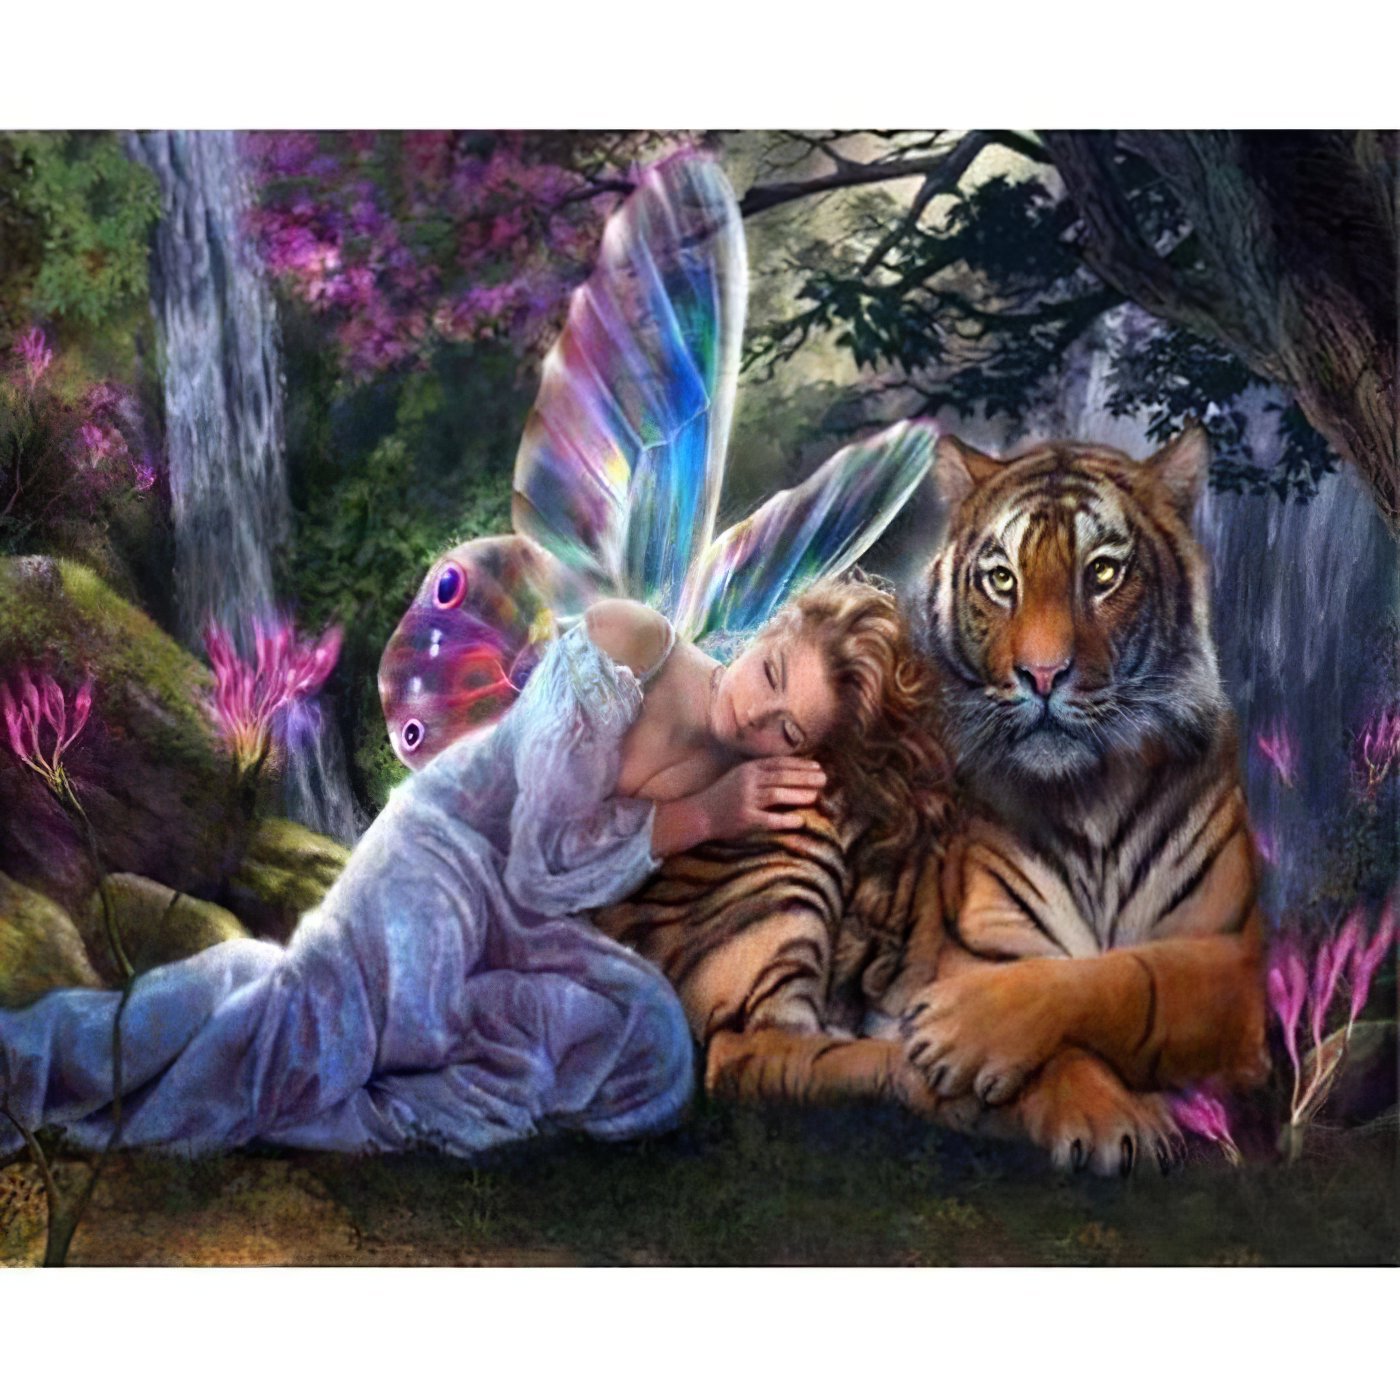 Angel Girl with Tiger: Fierce protection meets tender companionship Angel Girl With Tiger - Diamondartlove